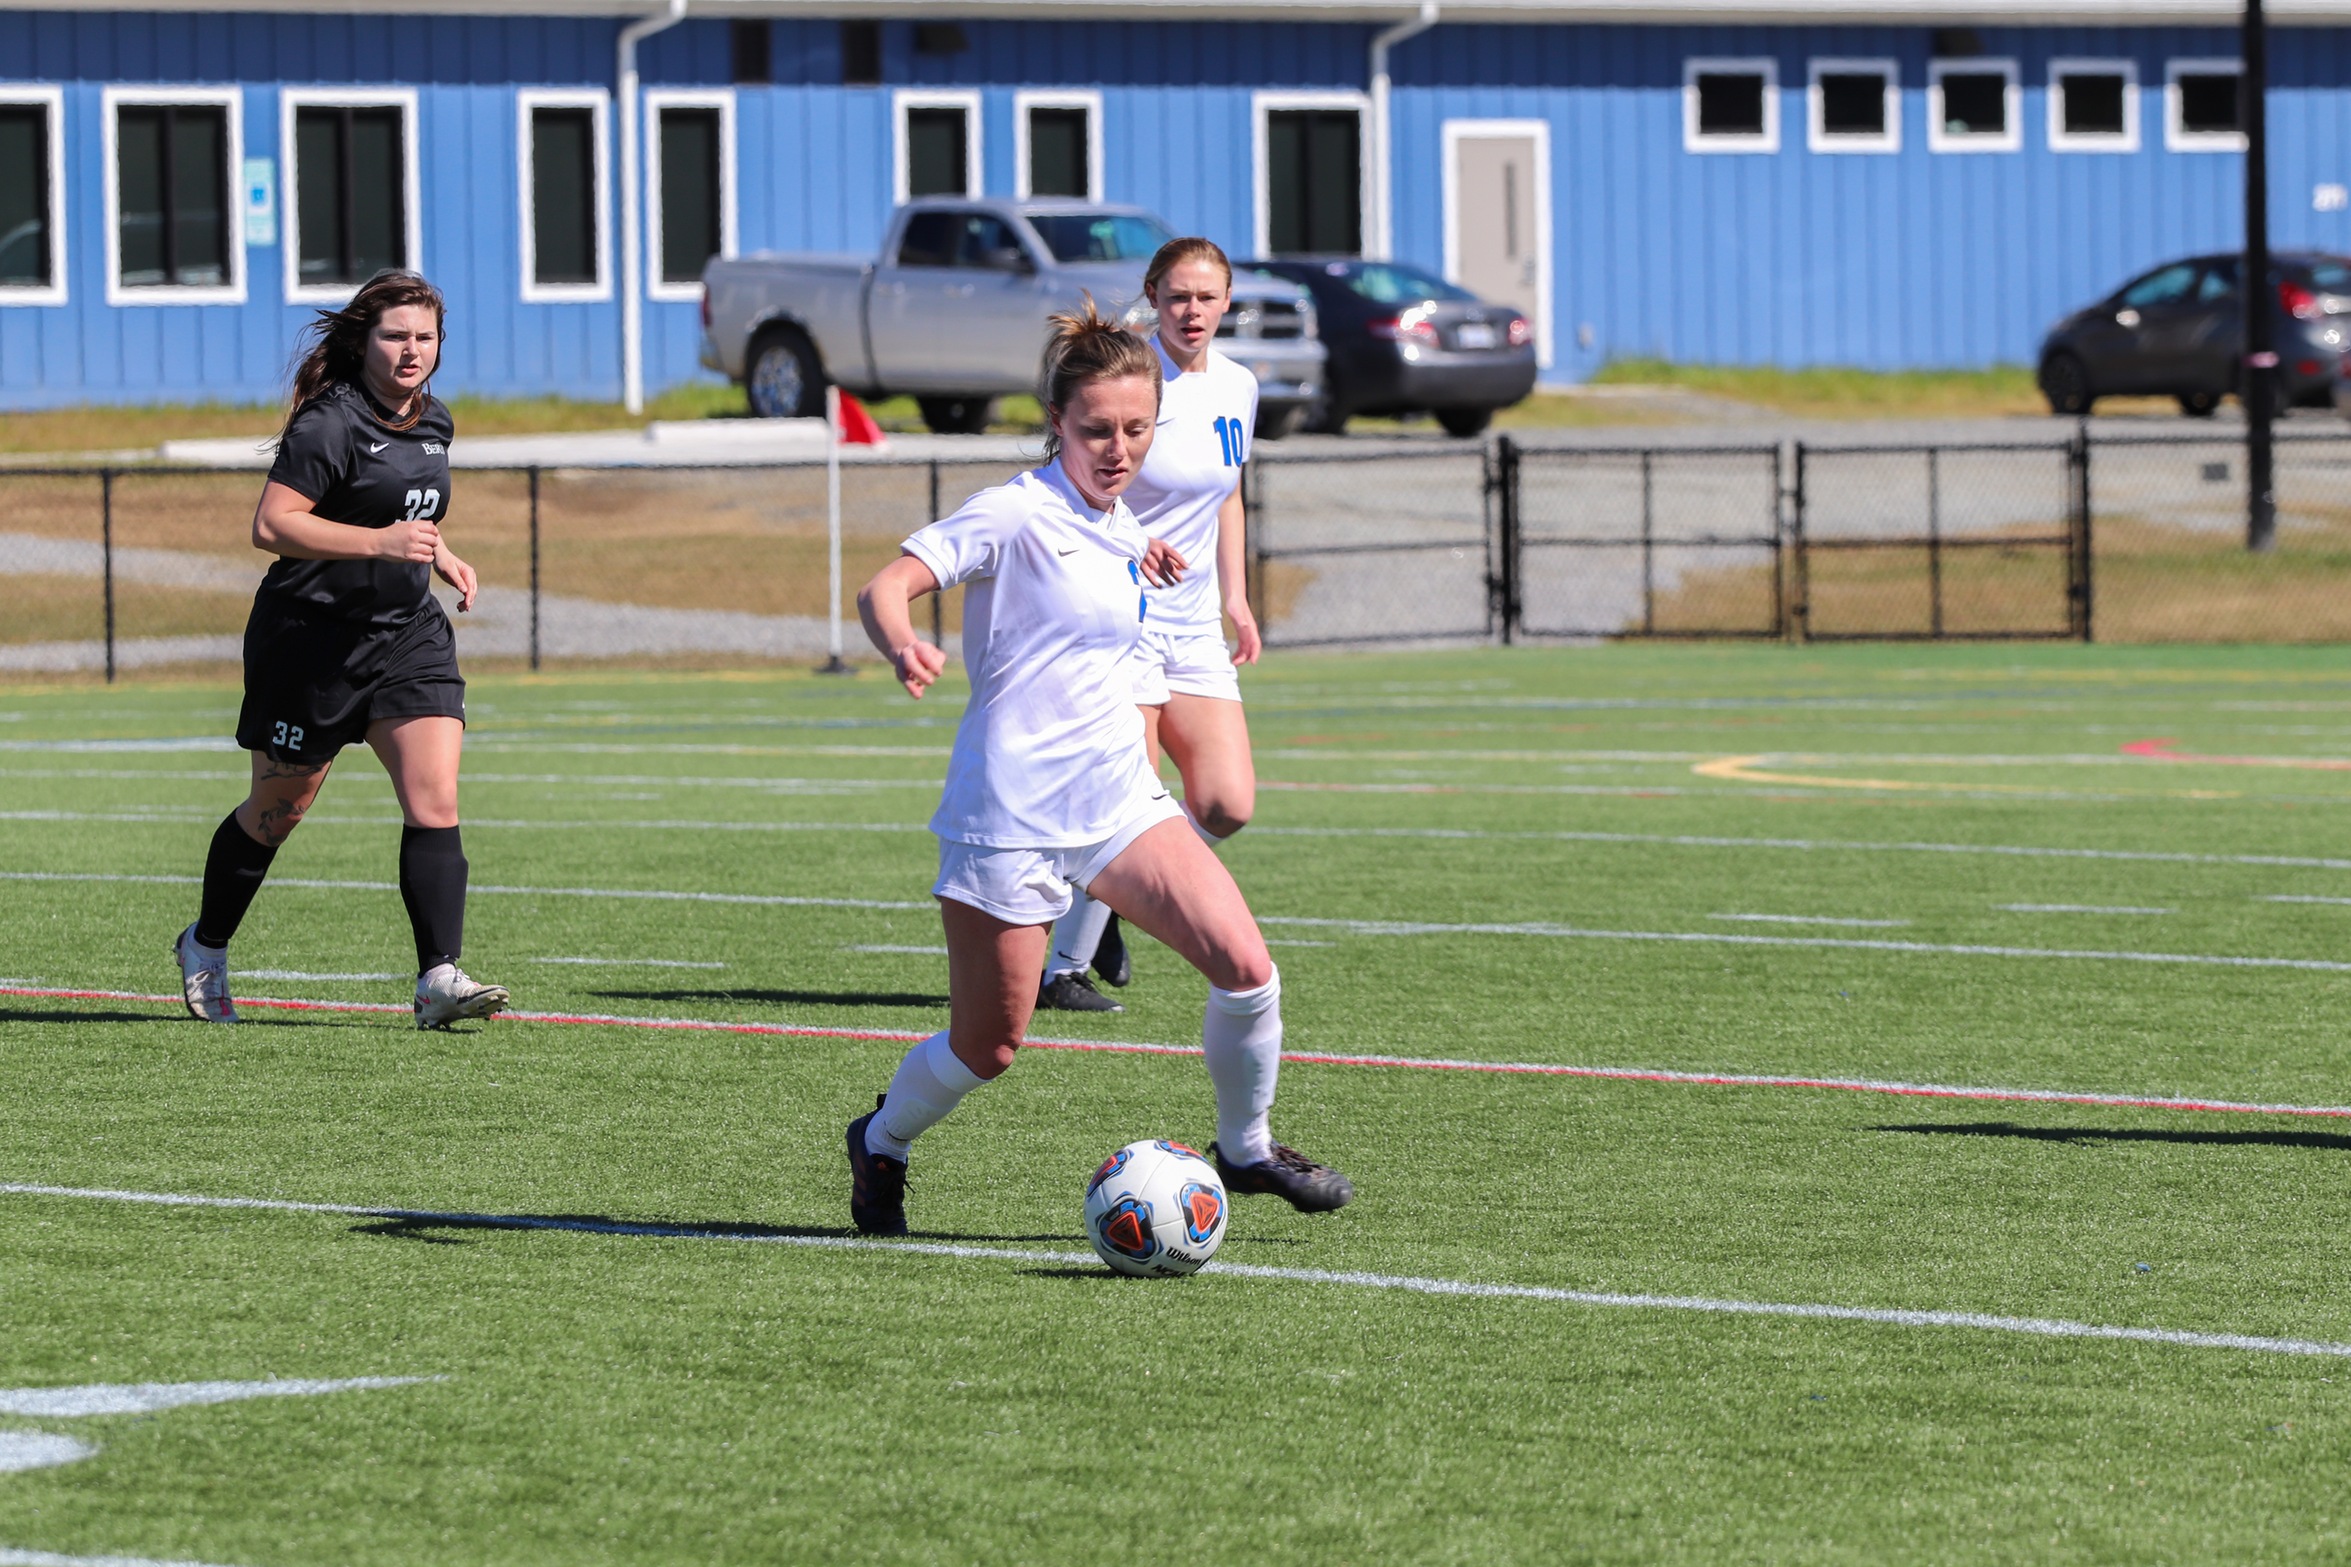 Senior midfielder Sallie Riggan scored and assisted to help BC cruise to a 4-0 victory vs. Wesleyan on the road (Photo courtesy of Victoria Brayman '22).